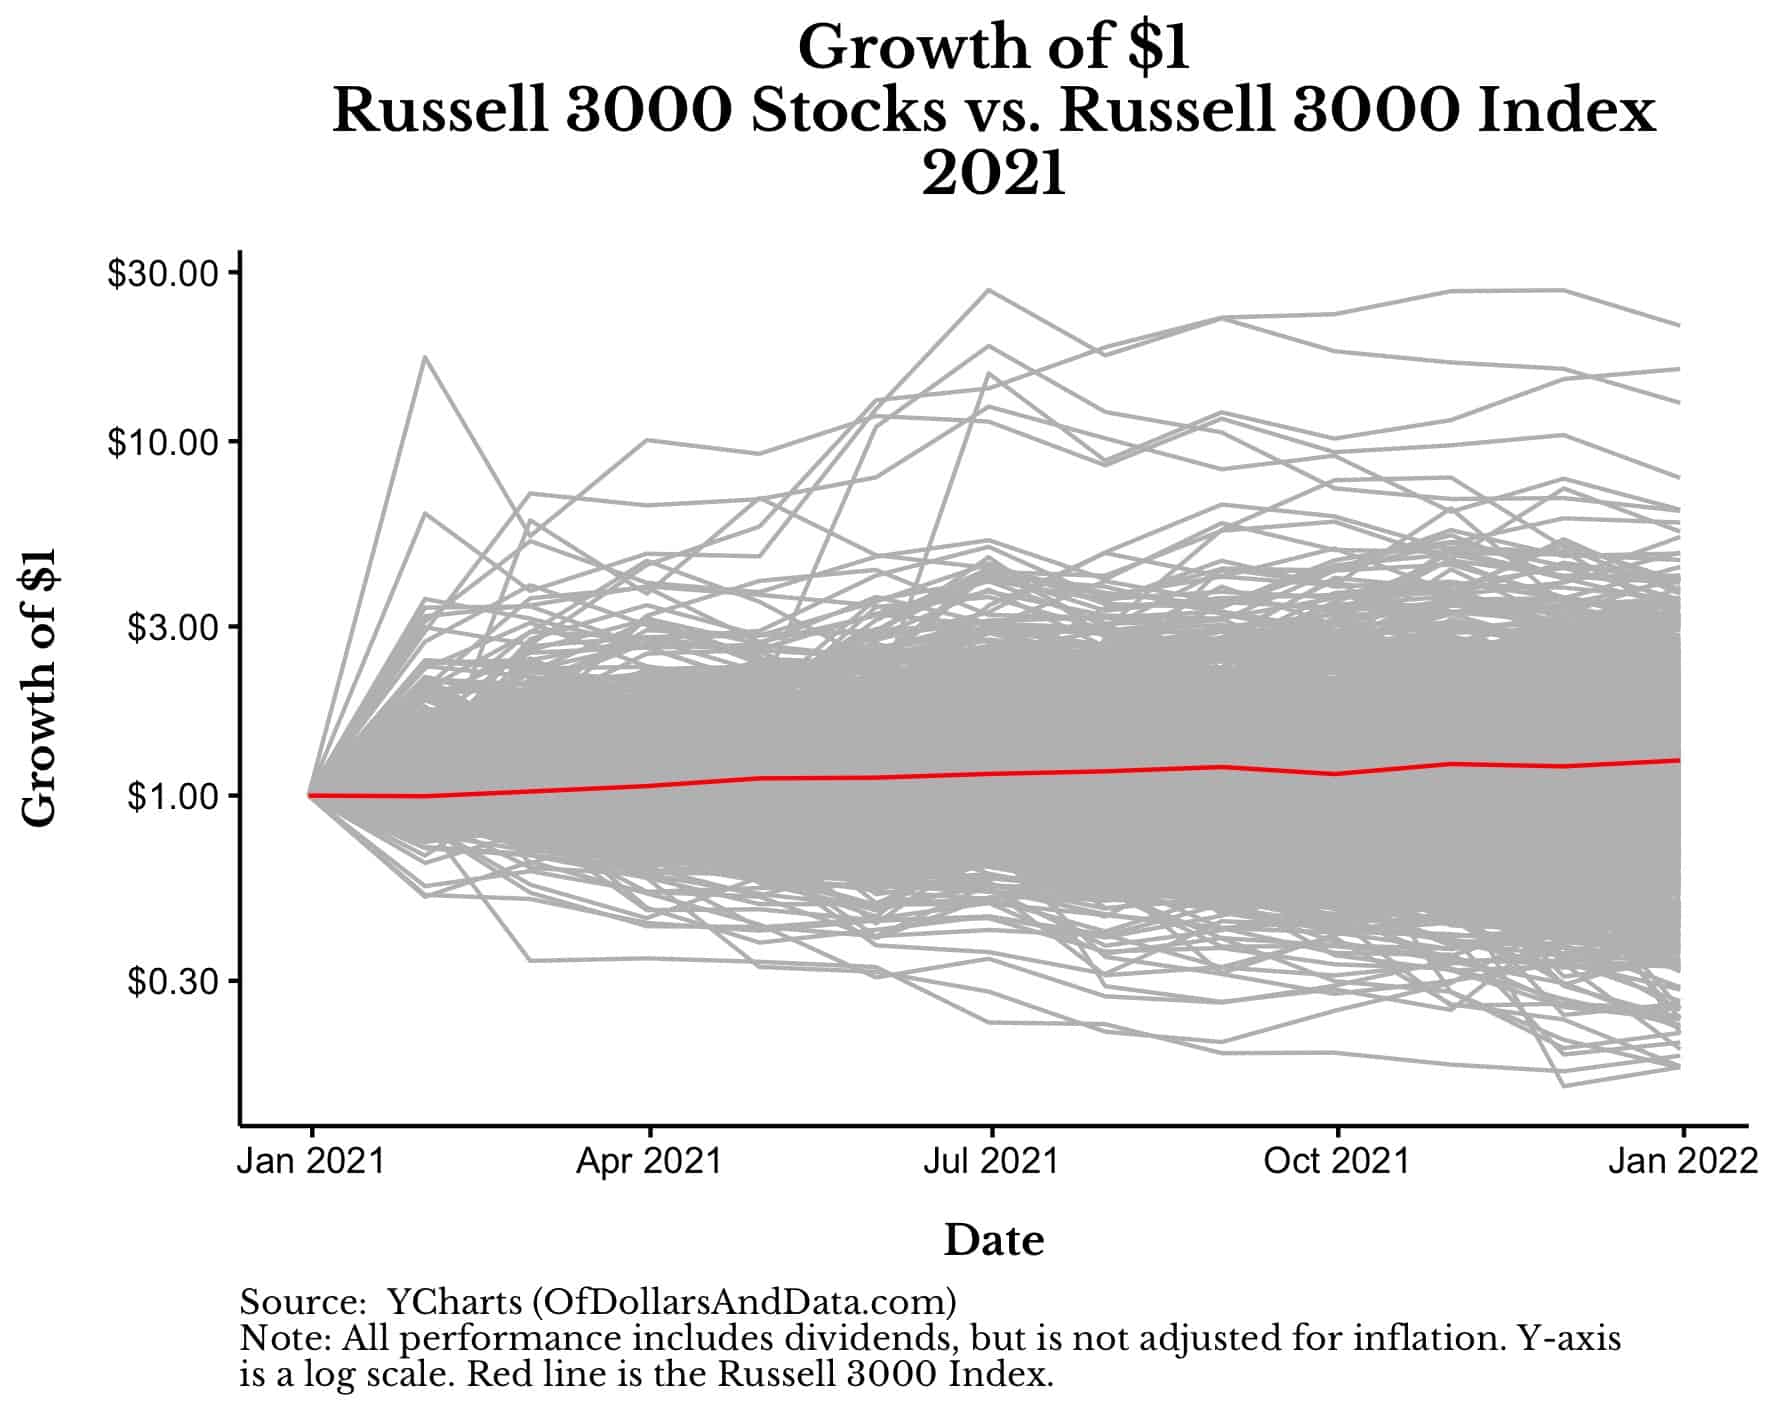 Chart showing growth of $1 for the Russell 3000 index vs its components for 2021.